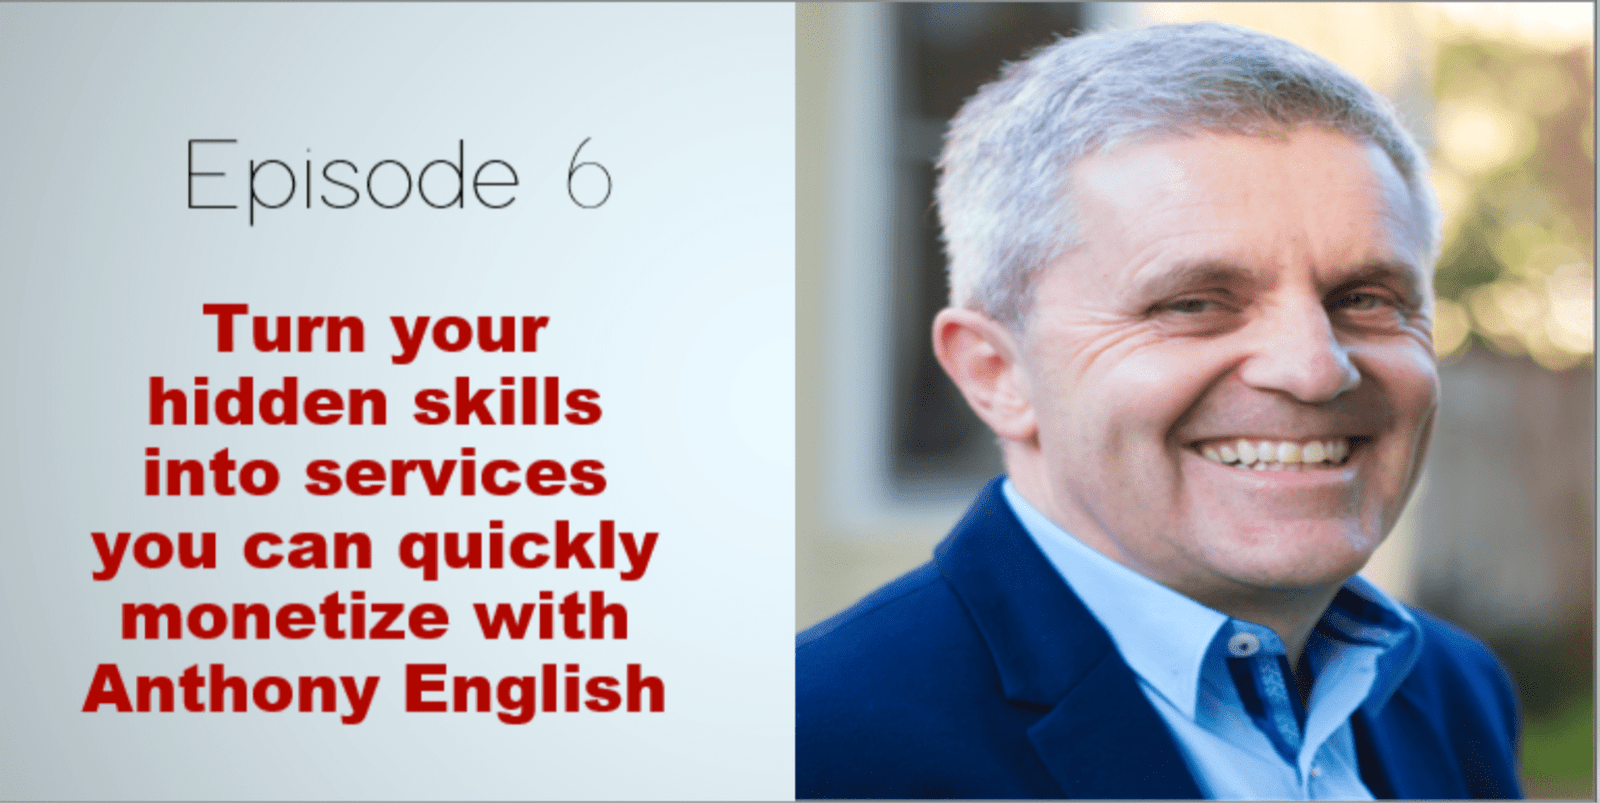 Invincible Success Podcast - Anthony English smiling_Episode 6